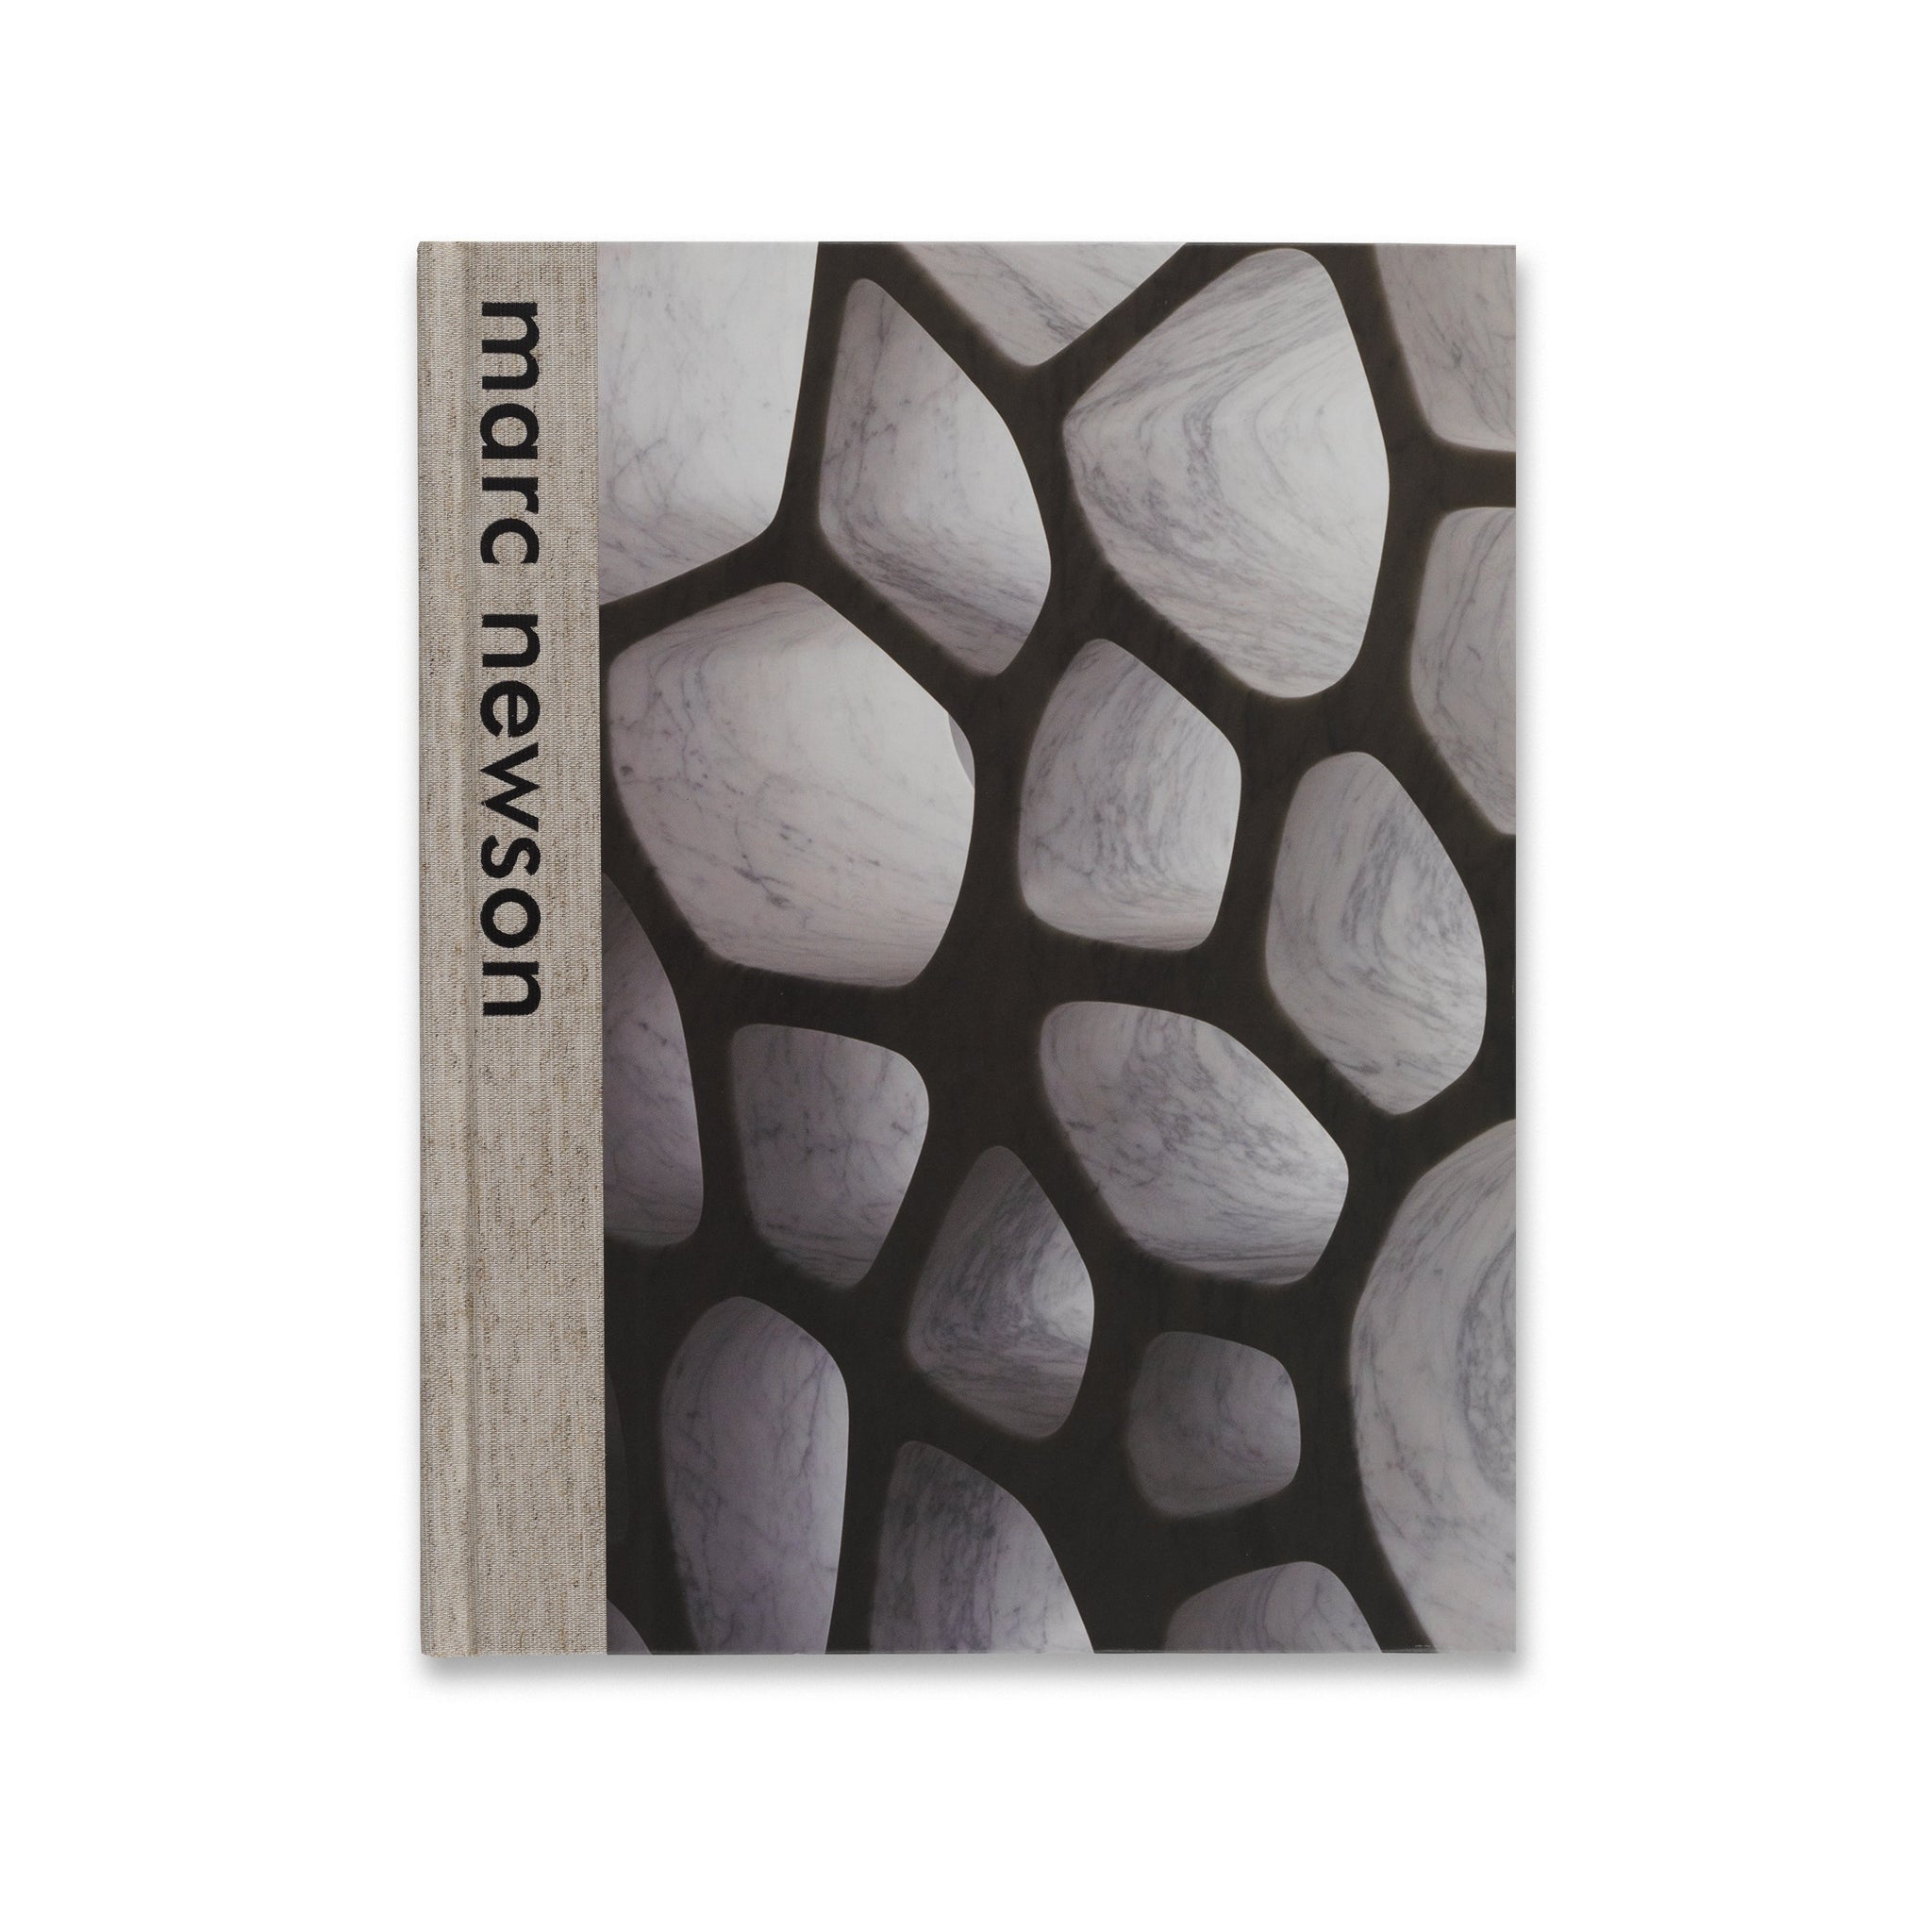 Cover of the book Marc Newson, published in 2007